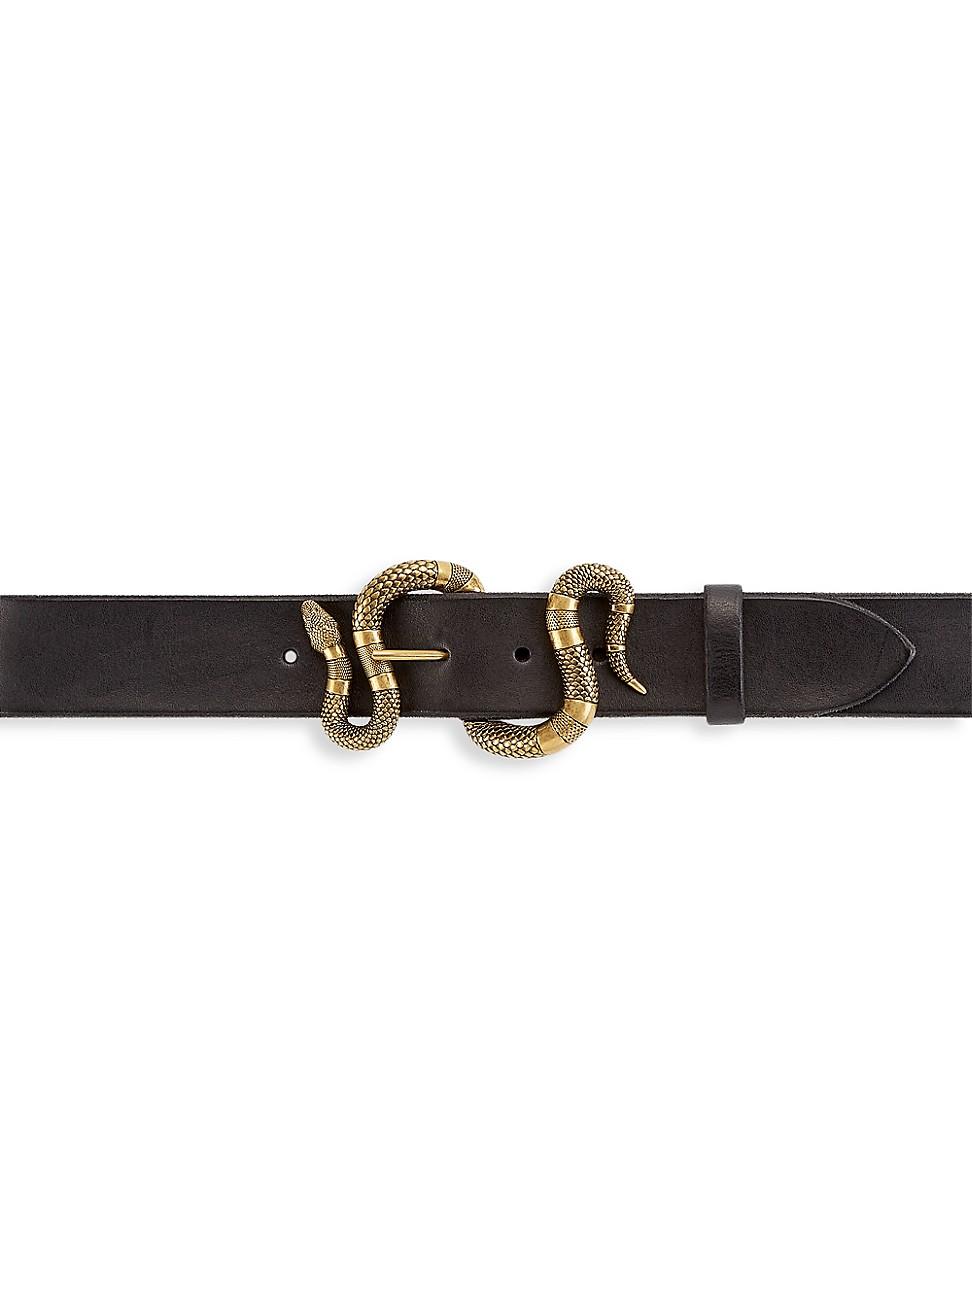 Gucci Leather Belt With Snake Buckle in Black for Men - Save 3% | Lyst